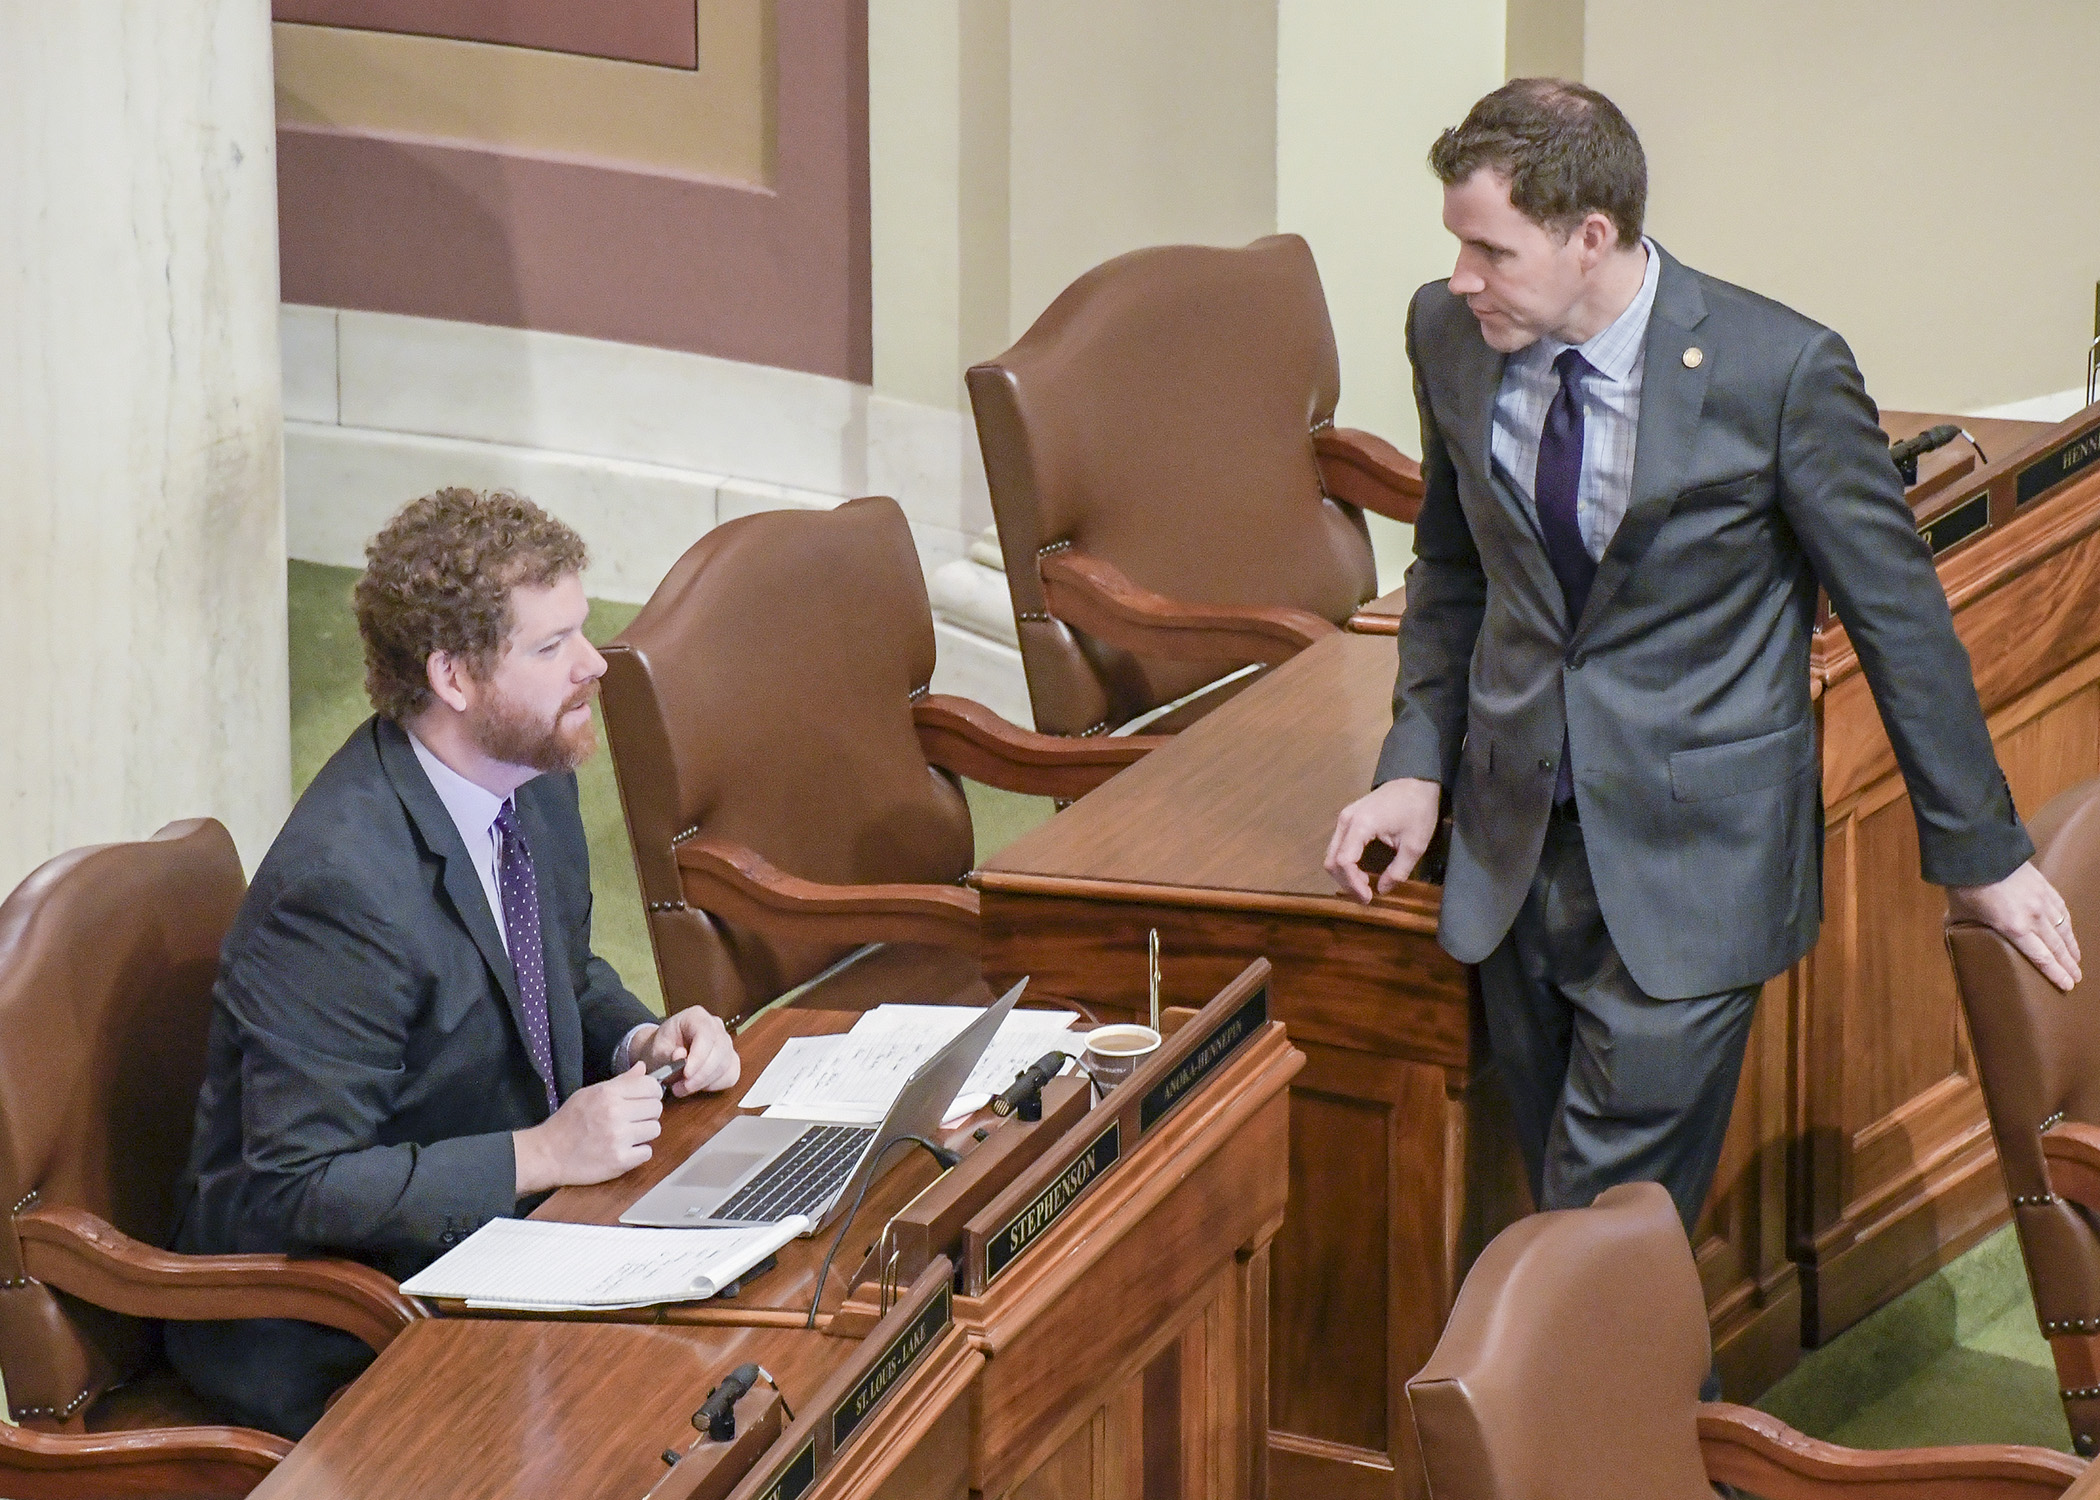 Rep. Zack Stephenson (left), chair of the House Commerce Finance and Policy Committee, and Rep. Jamie Long, chair of the House Climate and Energy Finance and Policy Committee, confer on the House floor prior to Monday. Photo by Andrew VonBank